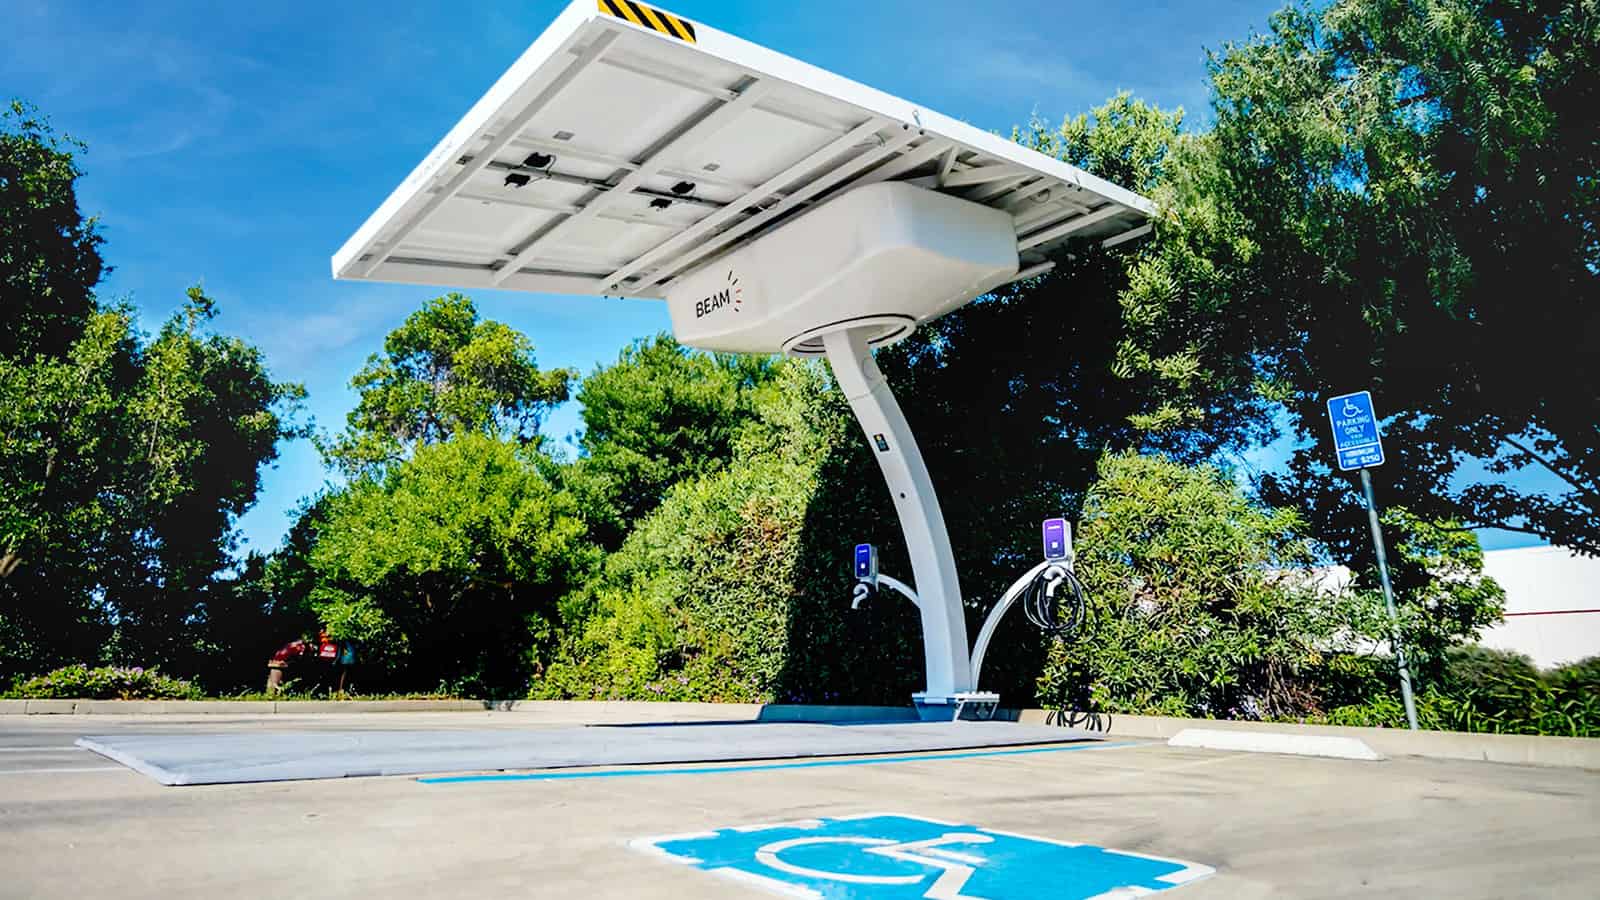 BEAM Global EV charging station, showing two charging ports and the large solar panel above